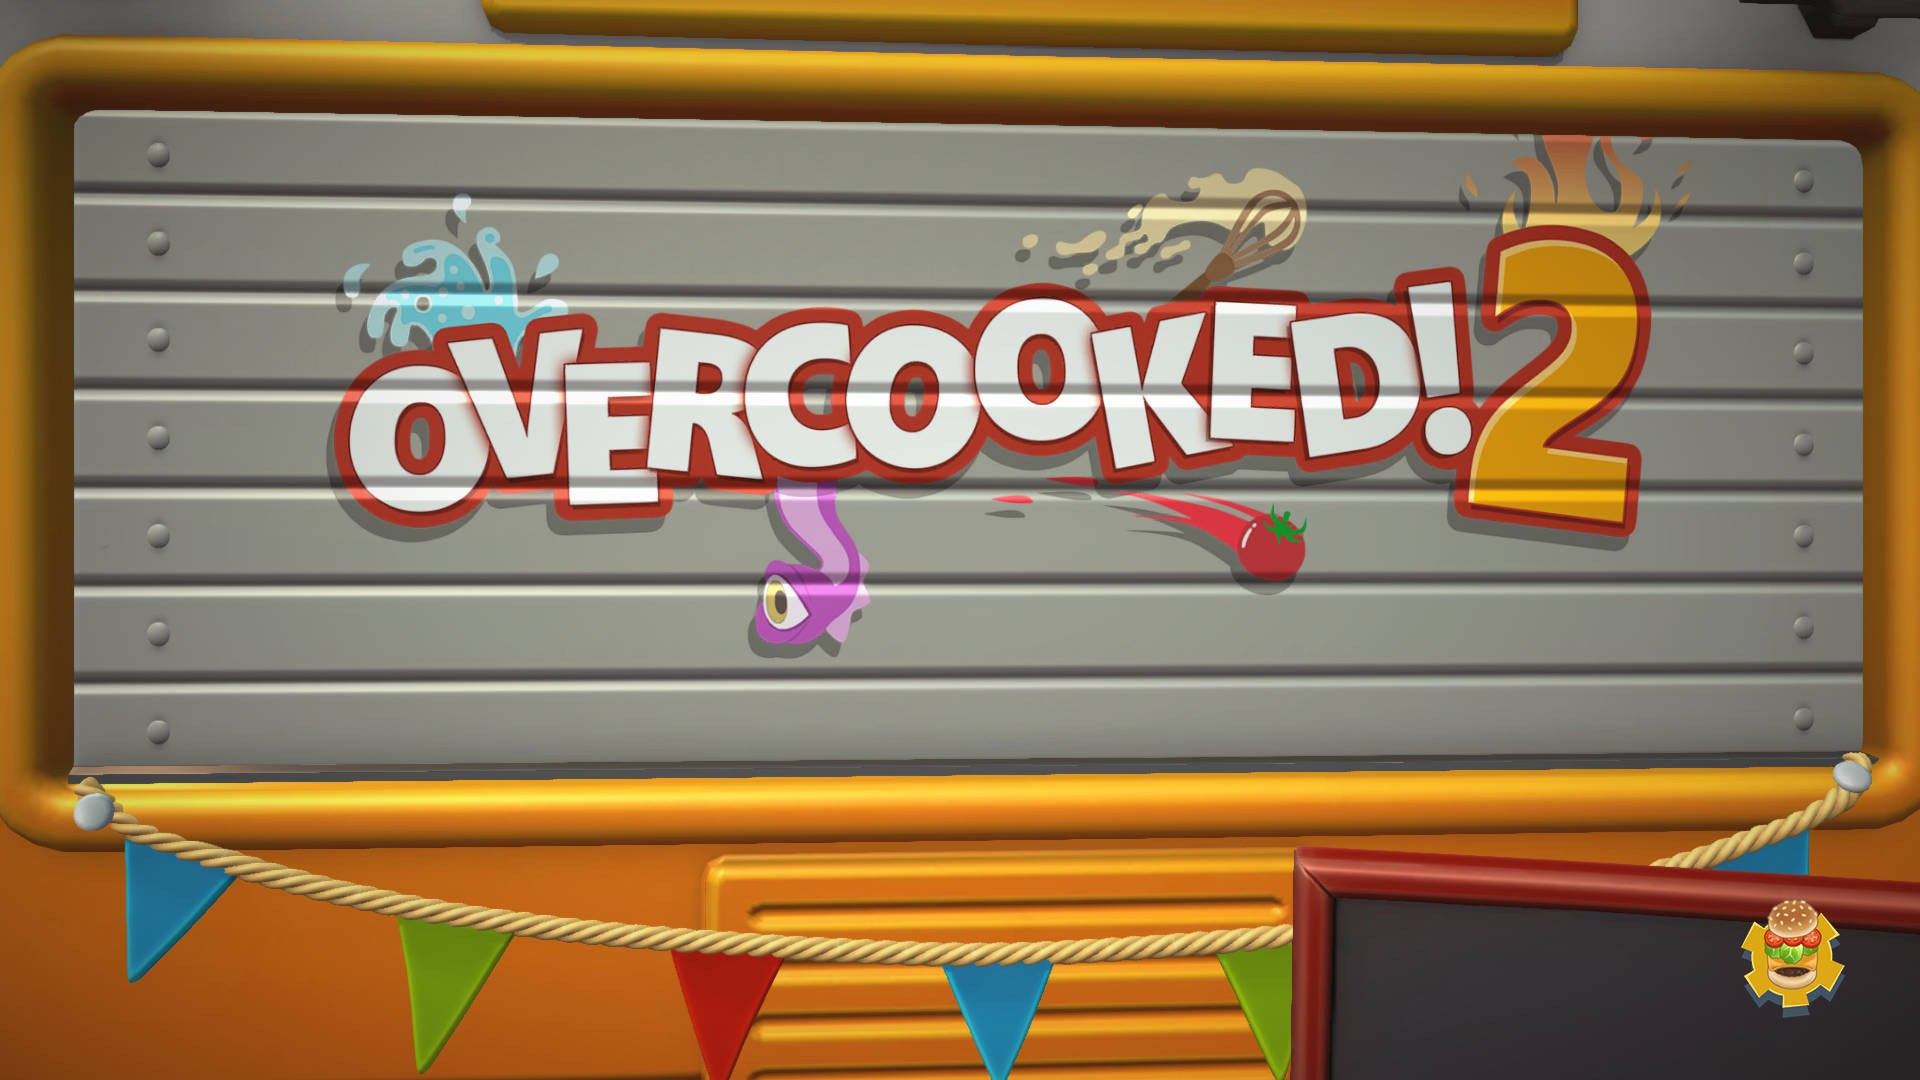 Overcooked 2 Truck Roll Up